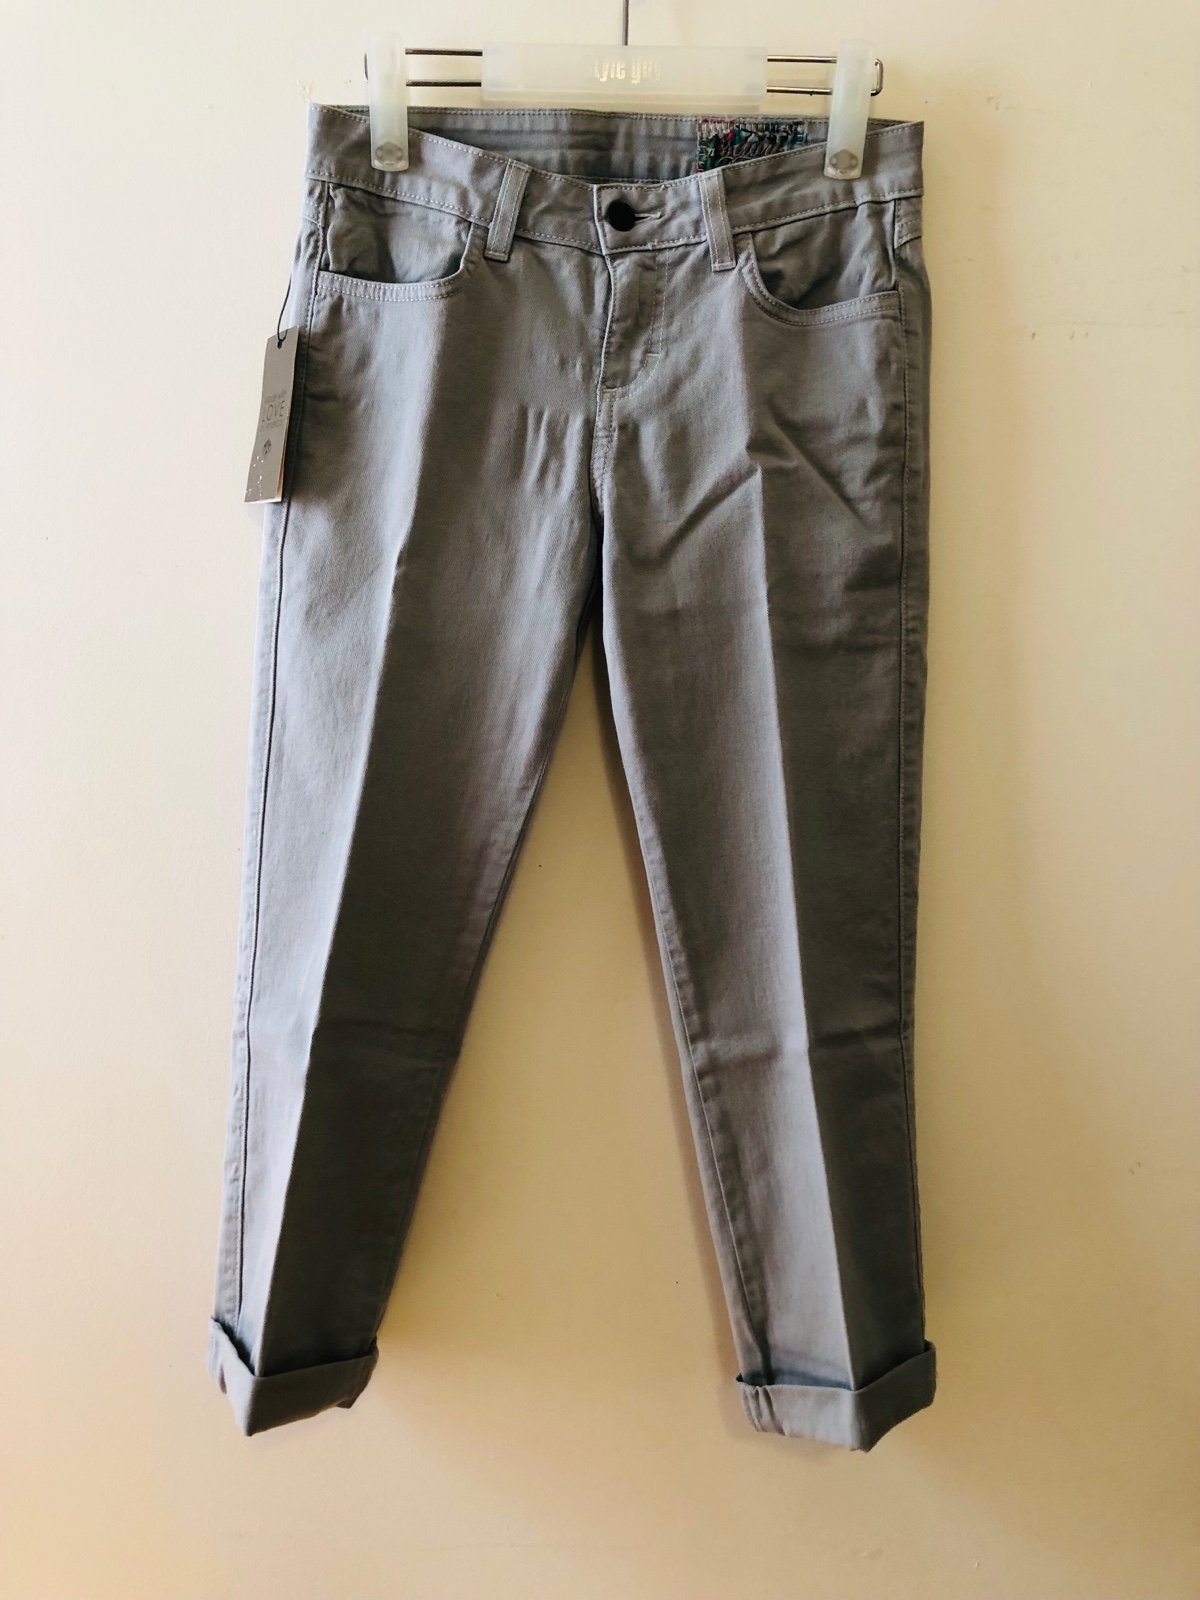 Affordable NEW Siwy Denim Women’s Cropped Pants NWT was $168.00 O0i8lz288 US Sale